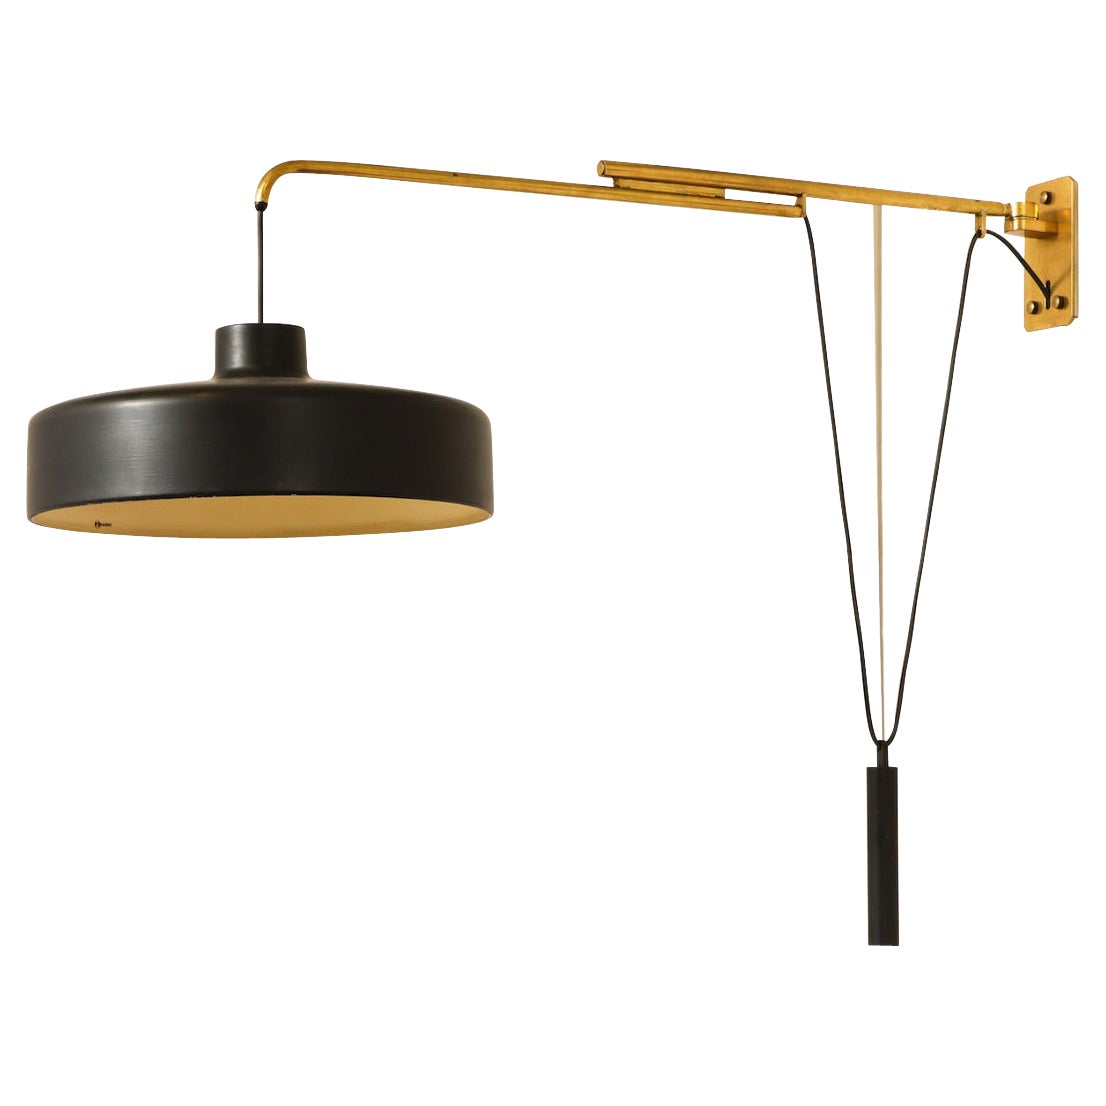 Adjustable Sconce #149/N by Gino Sarfatti for Arteluce